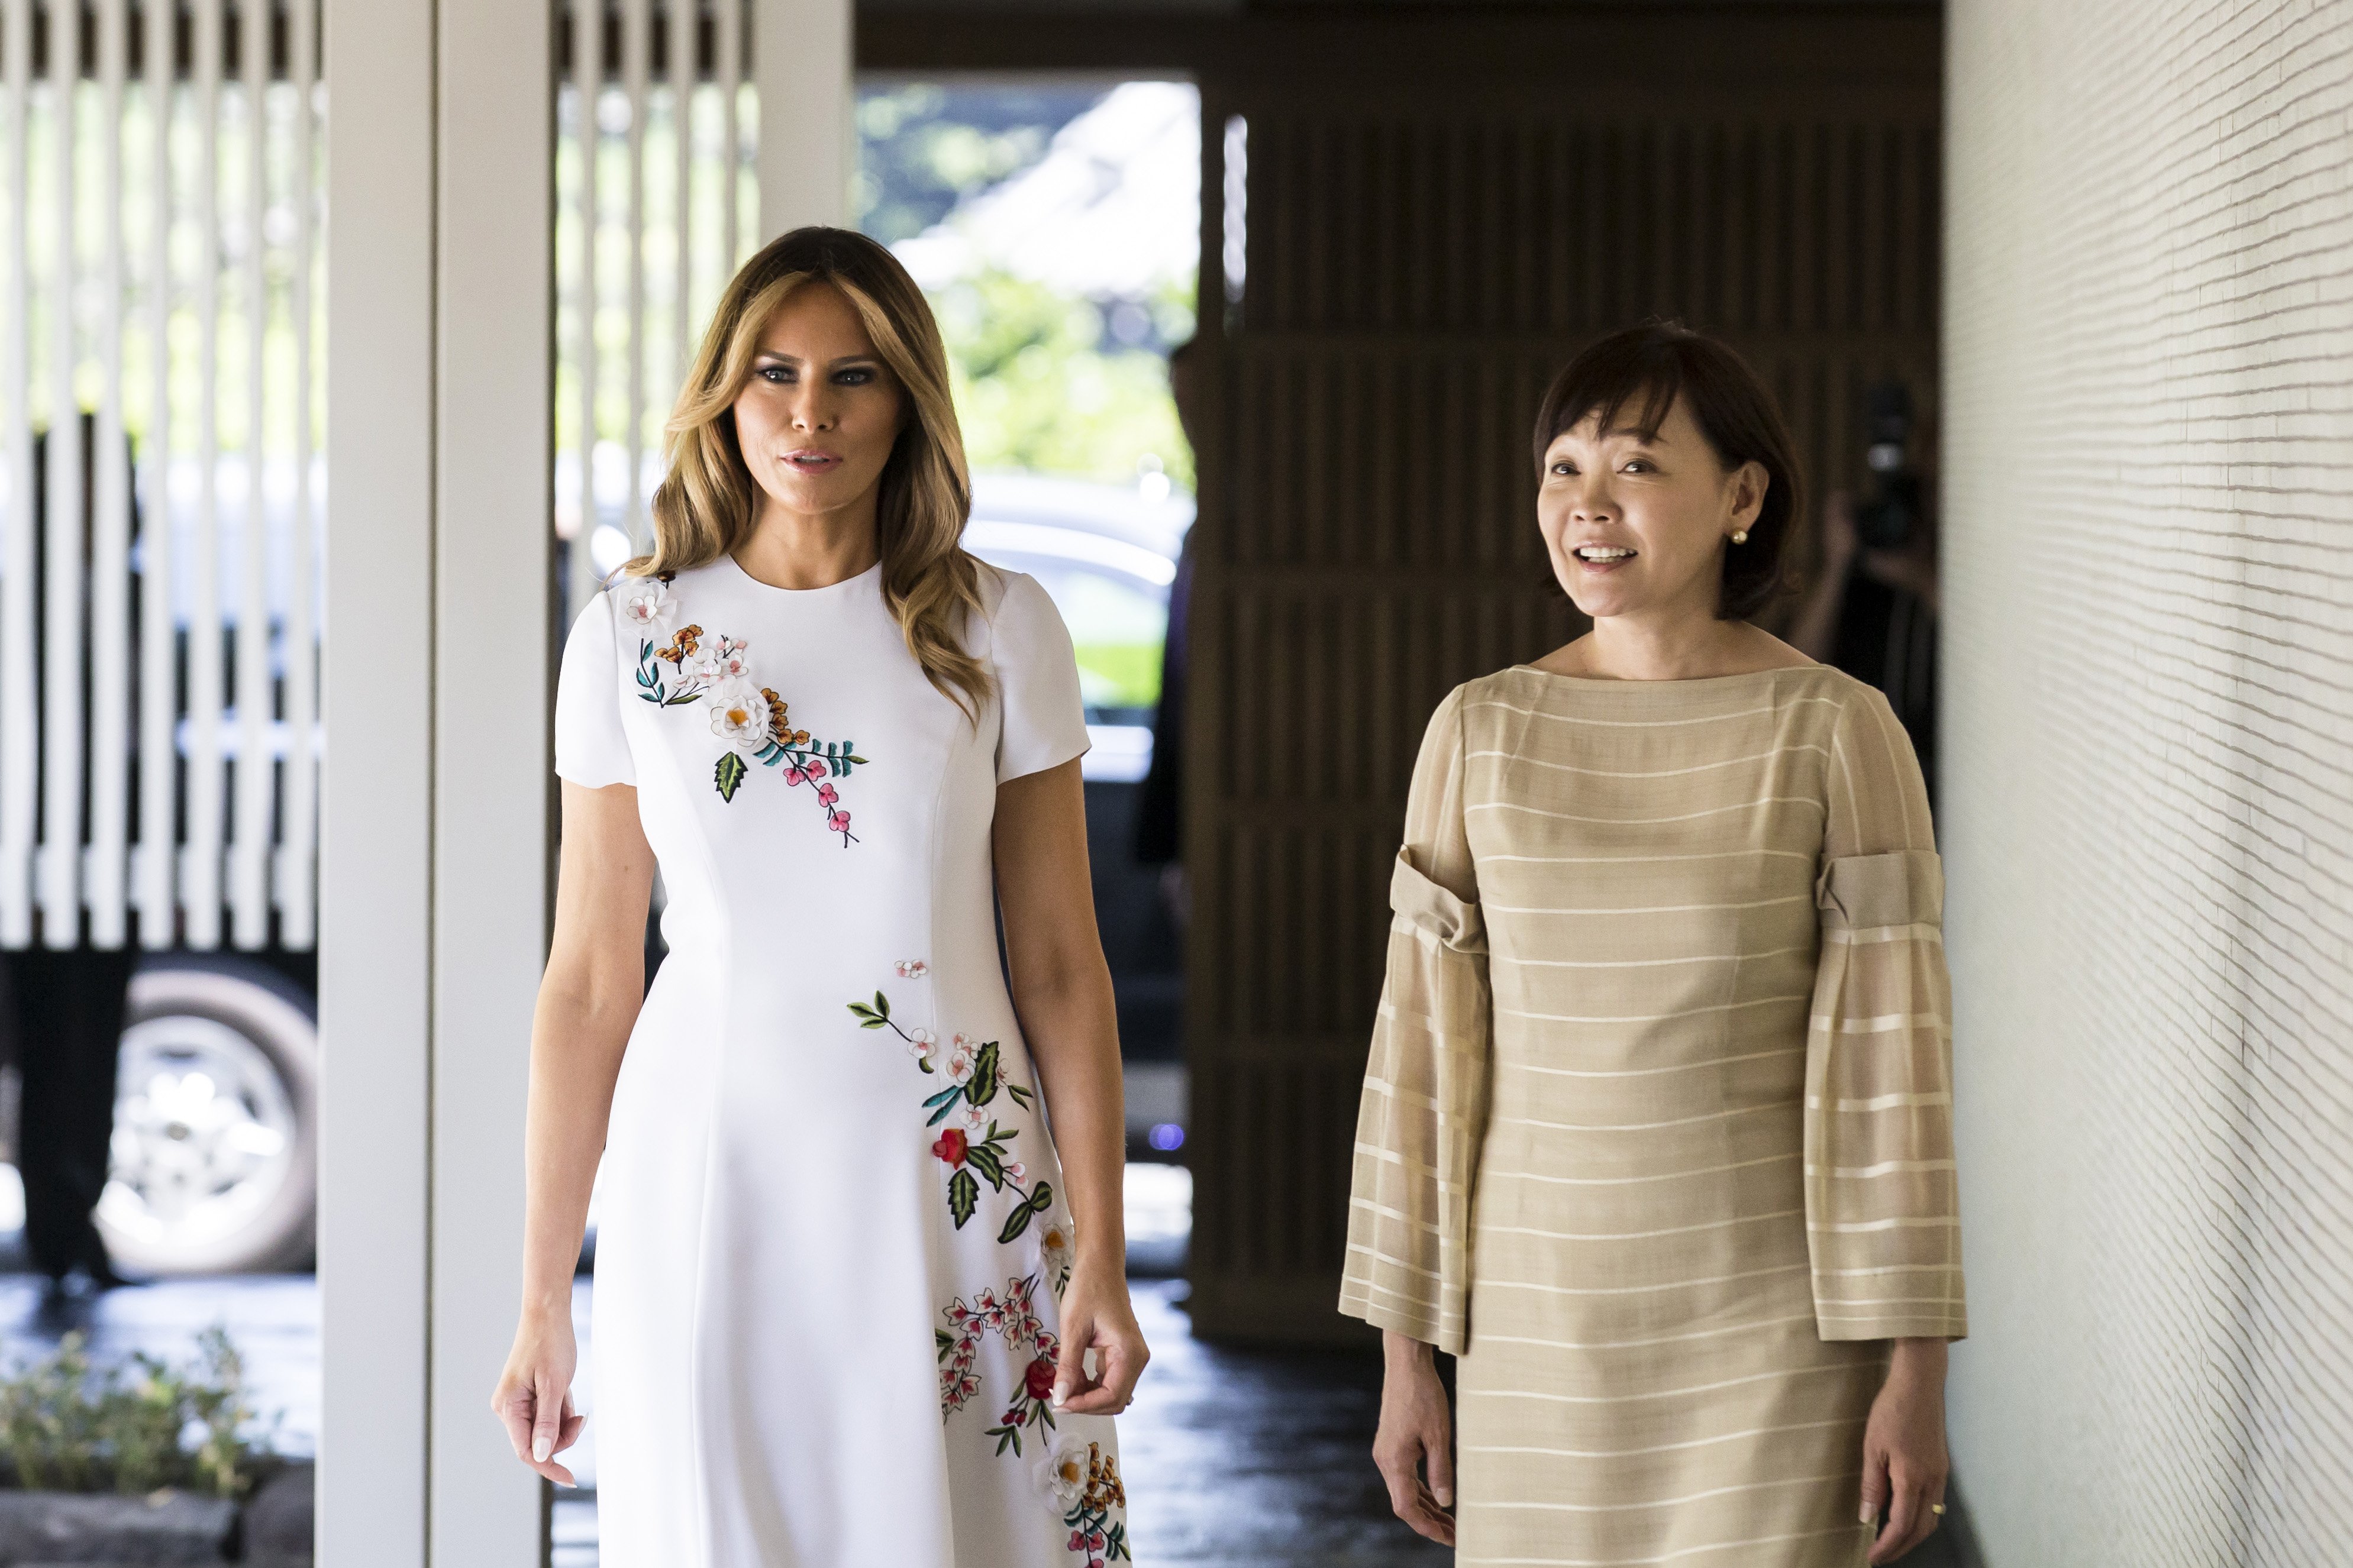 First Lady Melania Trump and Japan's Prime Minister's wife Akie Abe | Photo: Getty Images